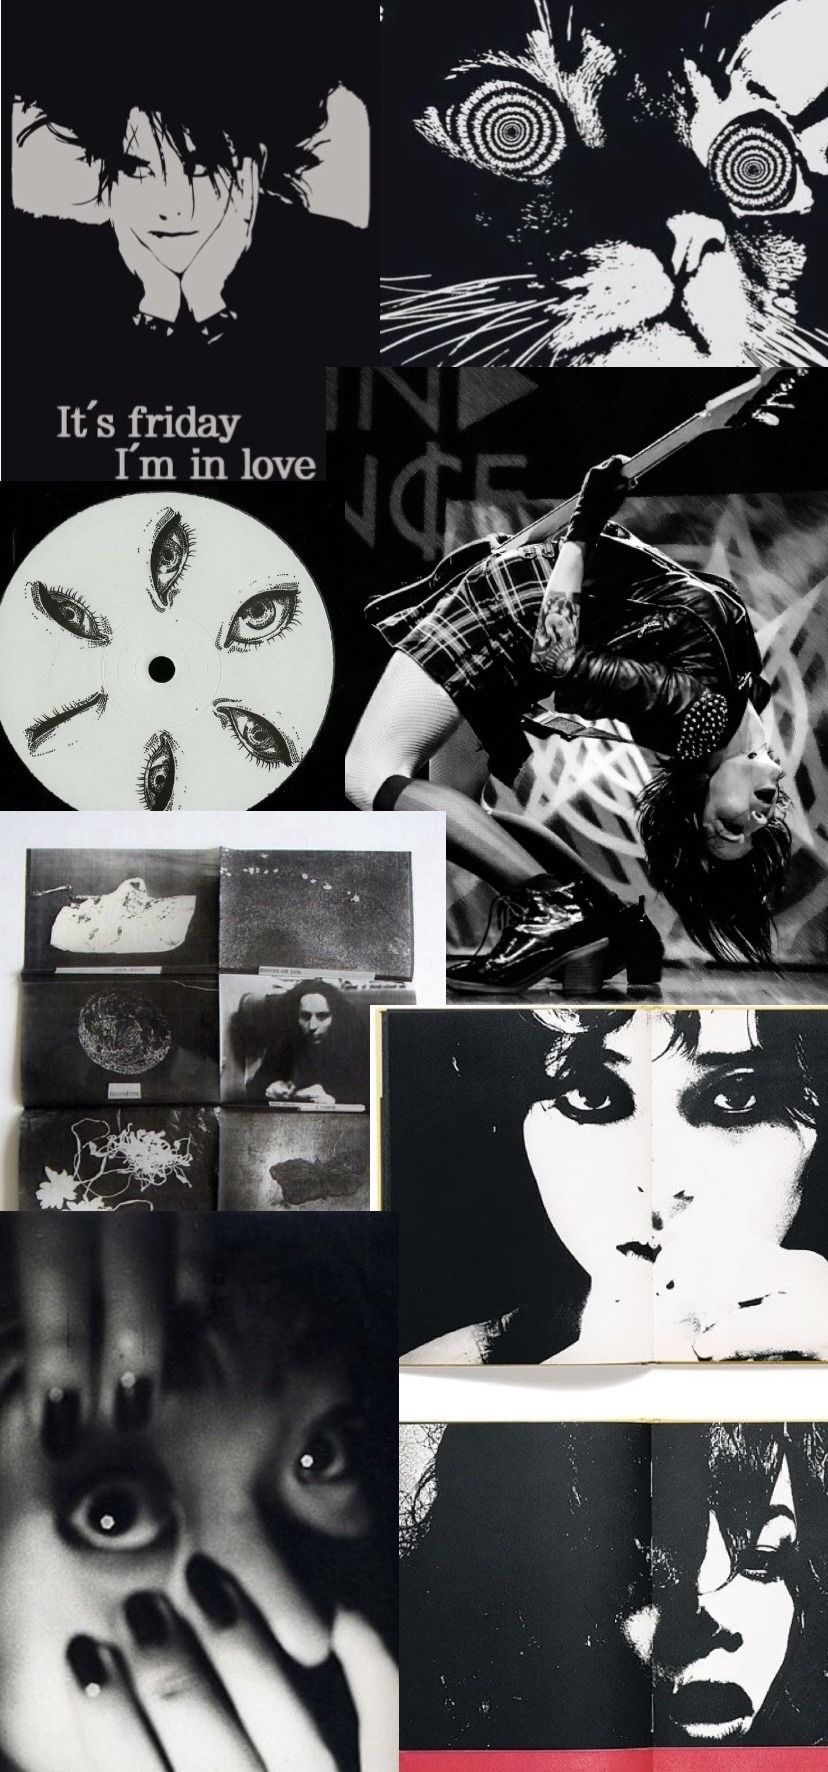 A collage of pictures with black and white images - Punk, weirdcore